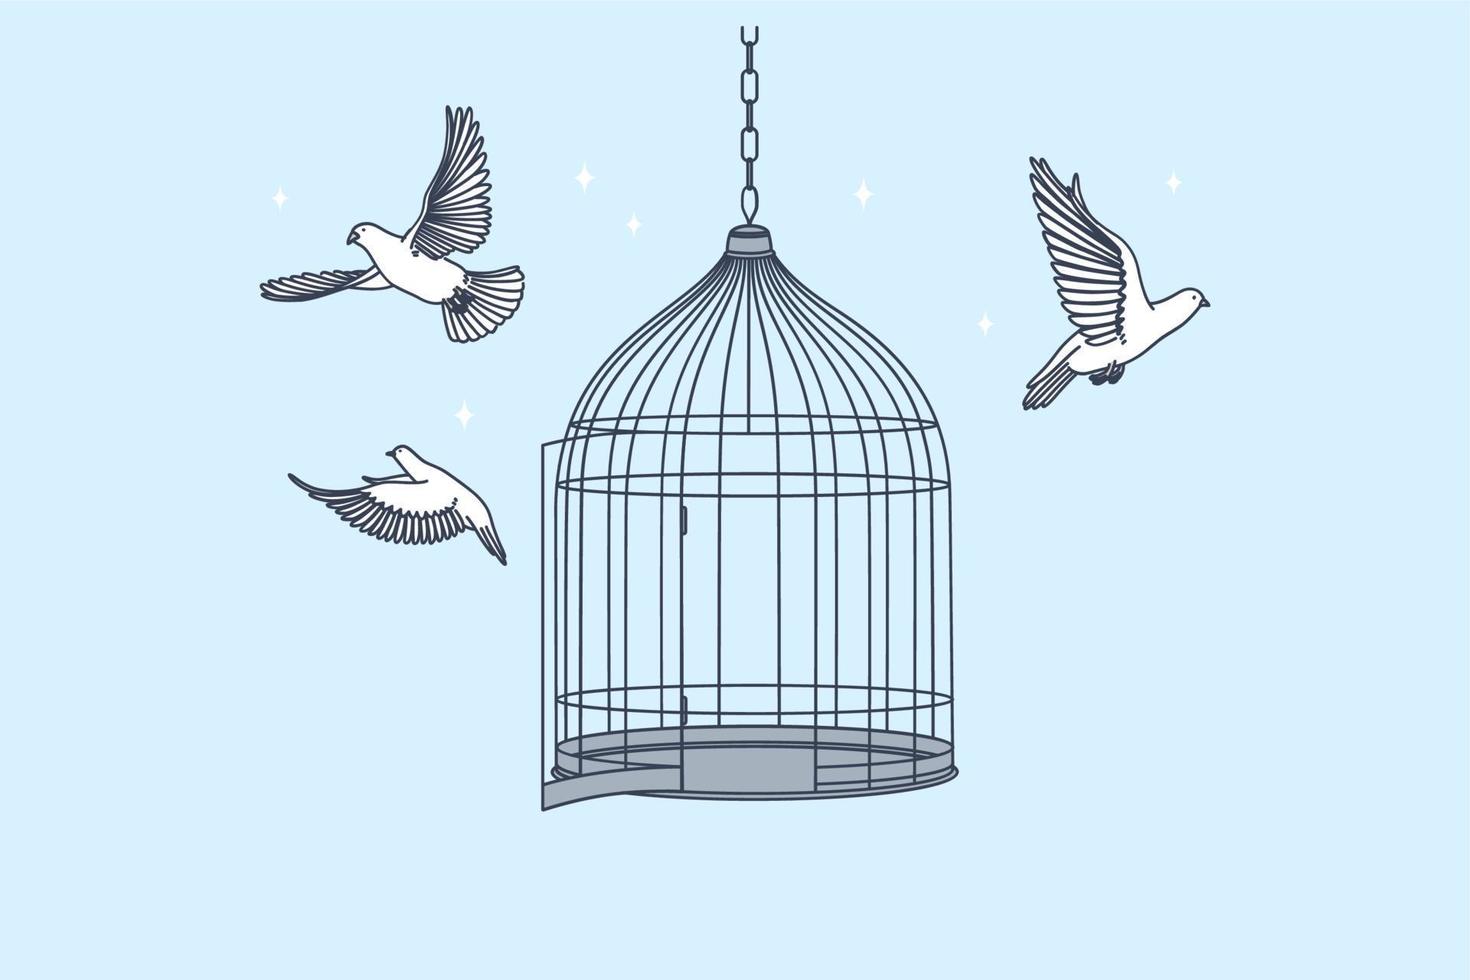 New opportunities, freedom, mental development concept. Open cage with flying from inside doves birds meaning getting freedom of mind and body illustration vector